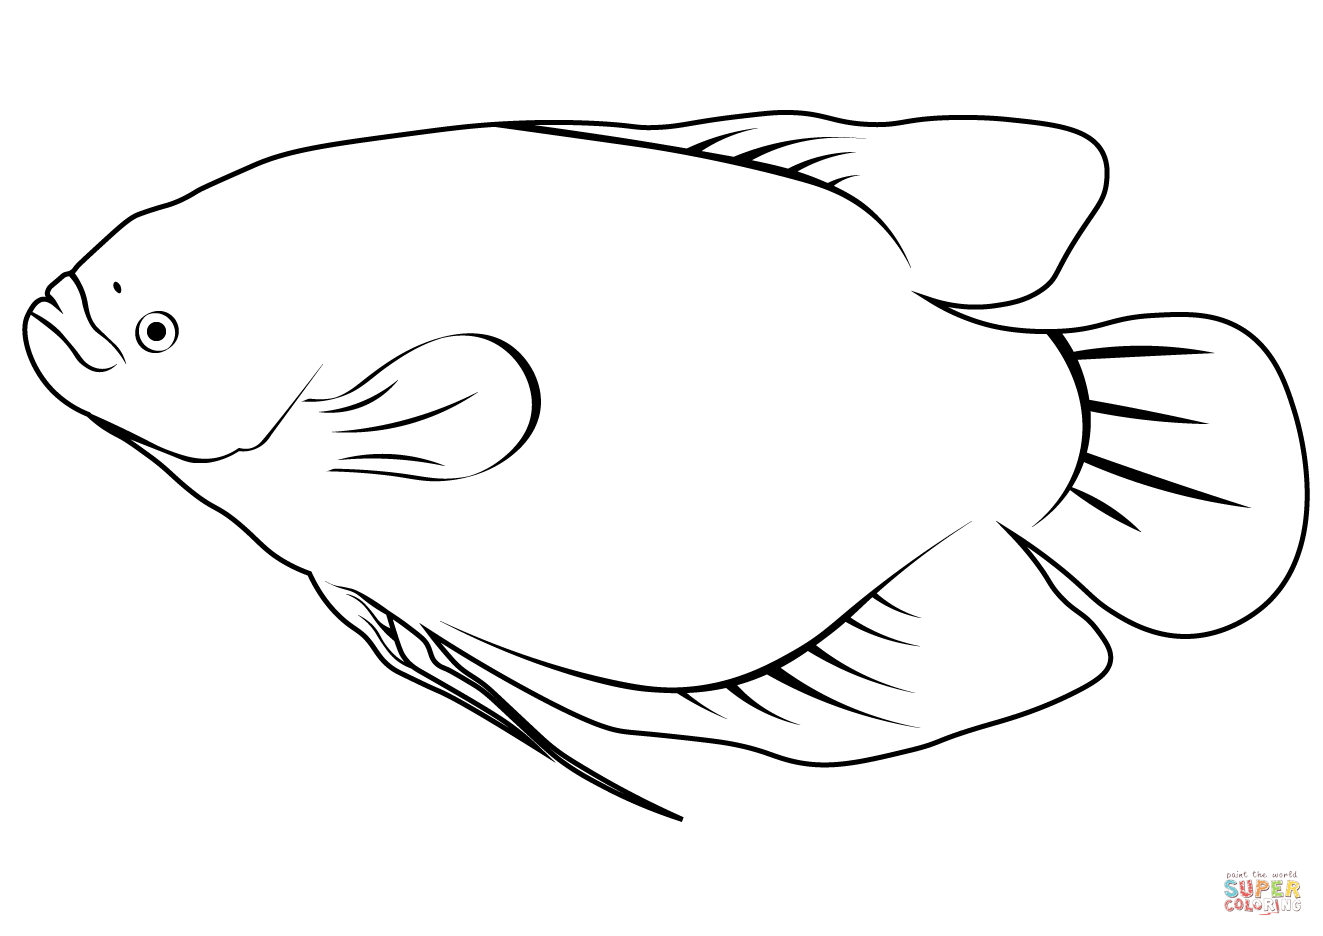 Giant gourami osphronemus goramy coloring page free printable coloring pages